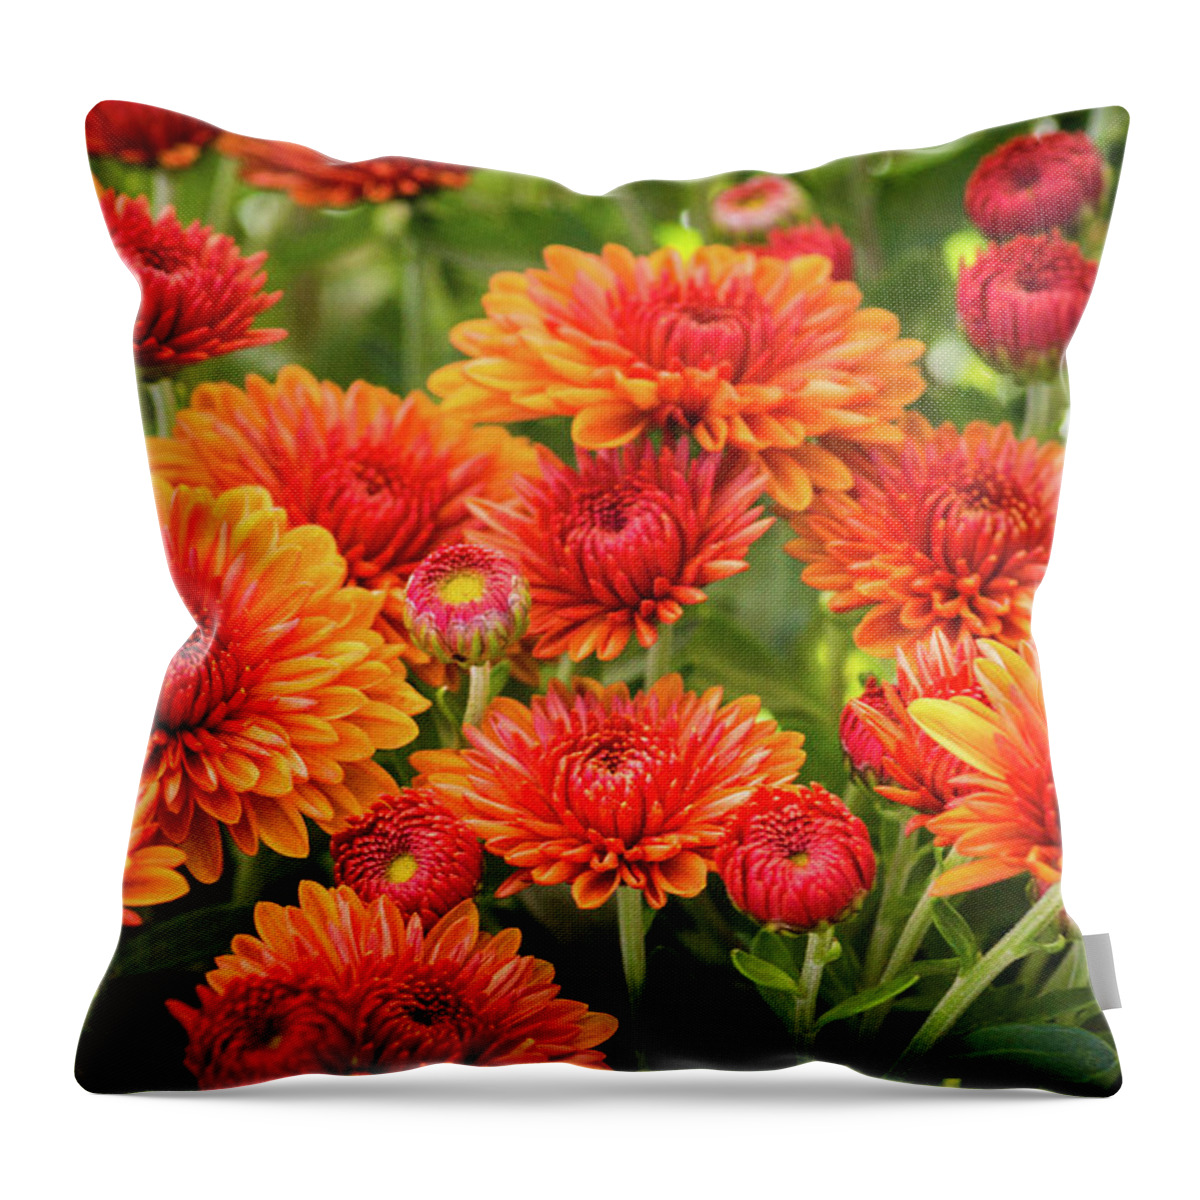 Red Throw Pillow featuring the photograph The Fall Bloom by Bill Pevlor